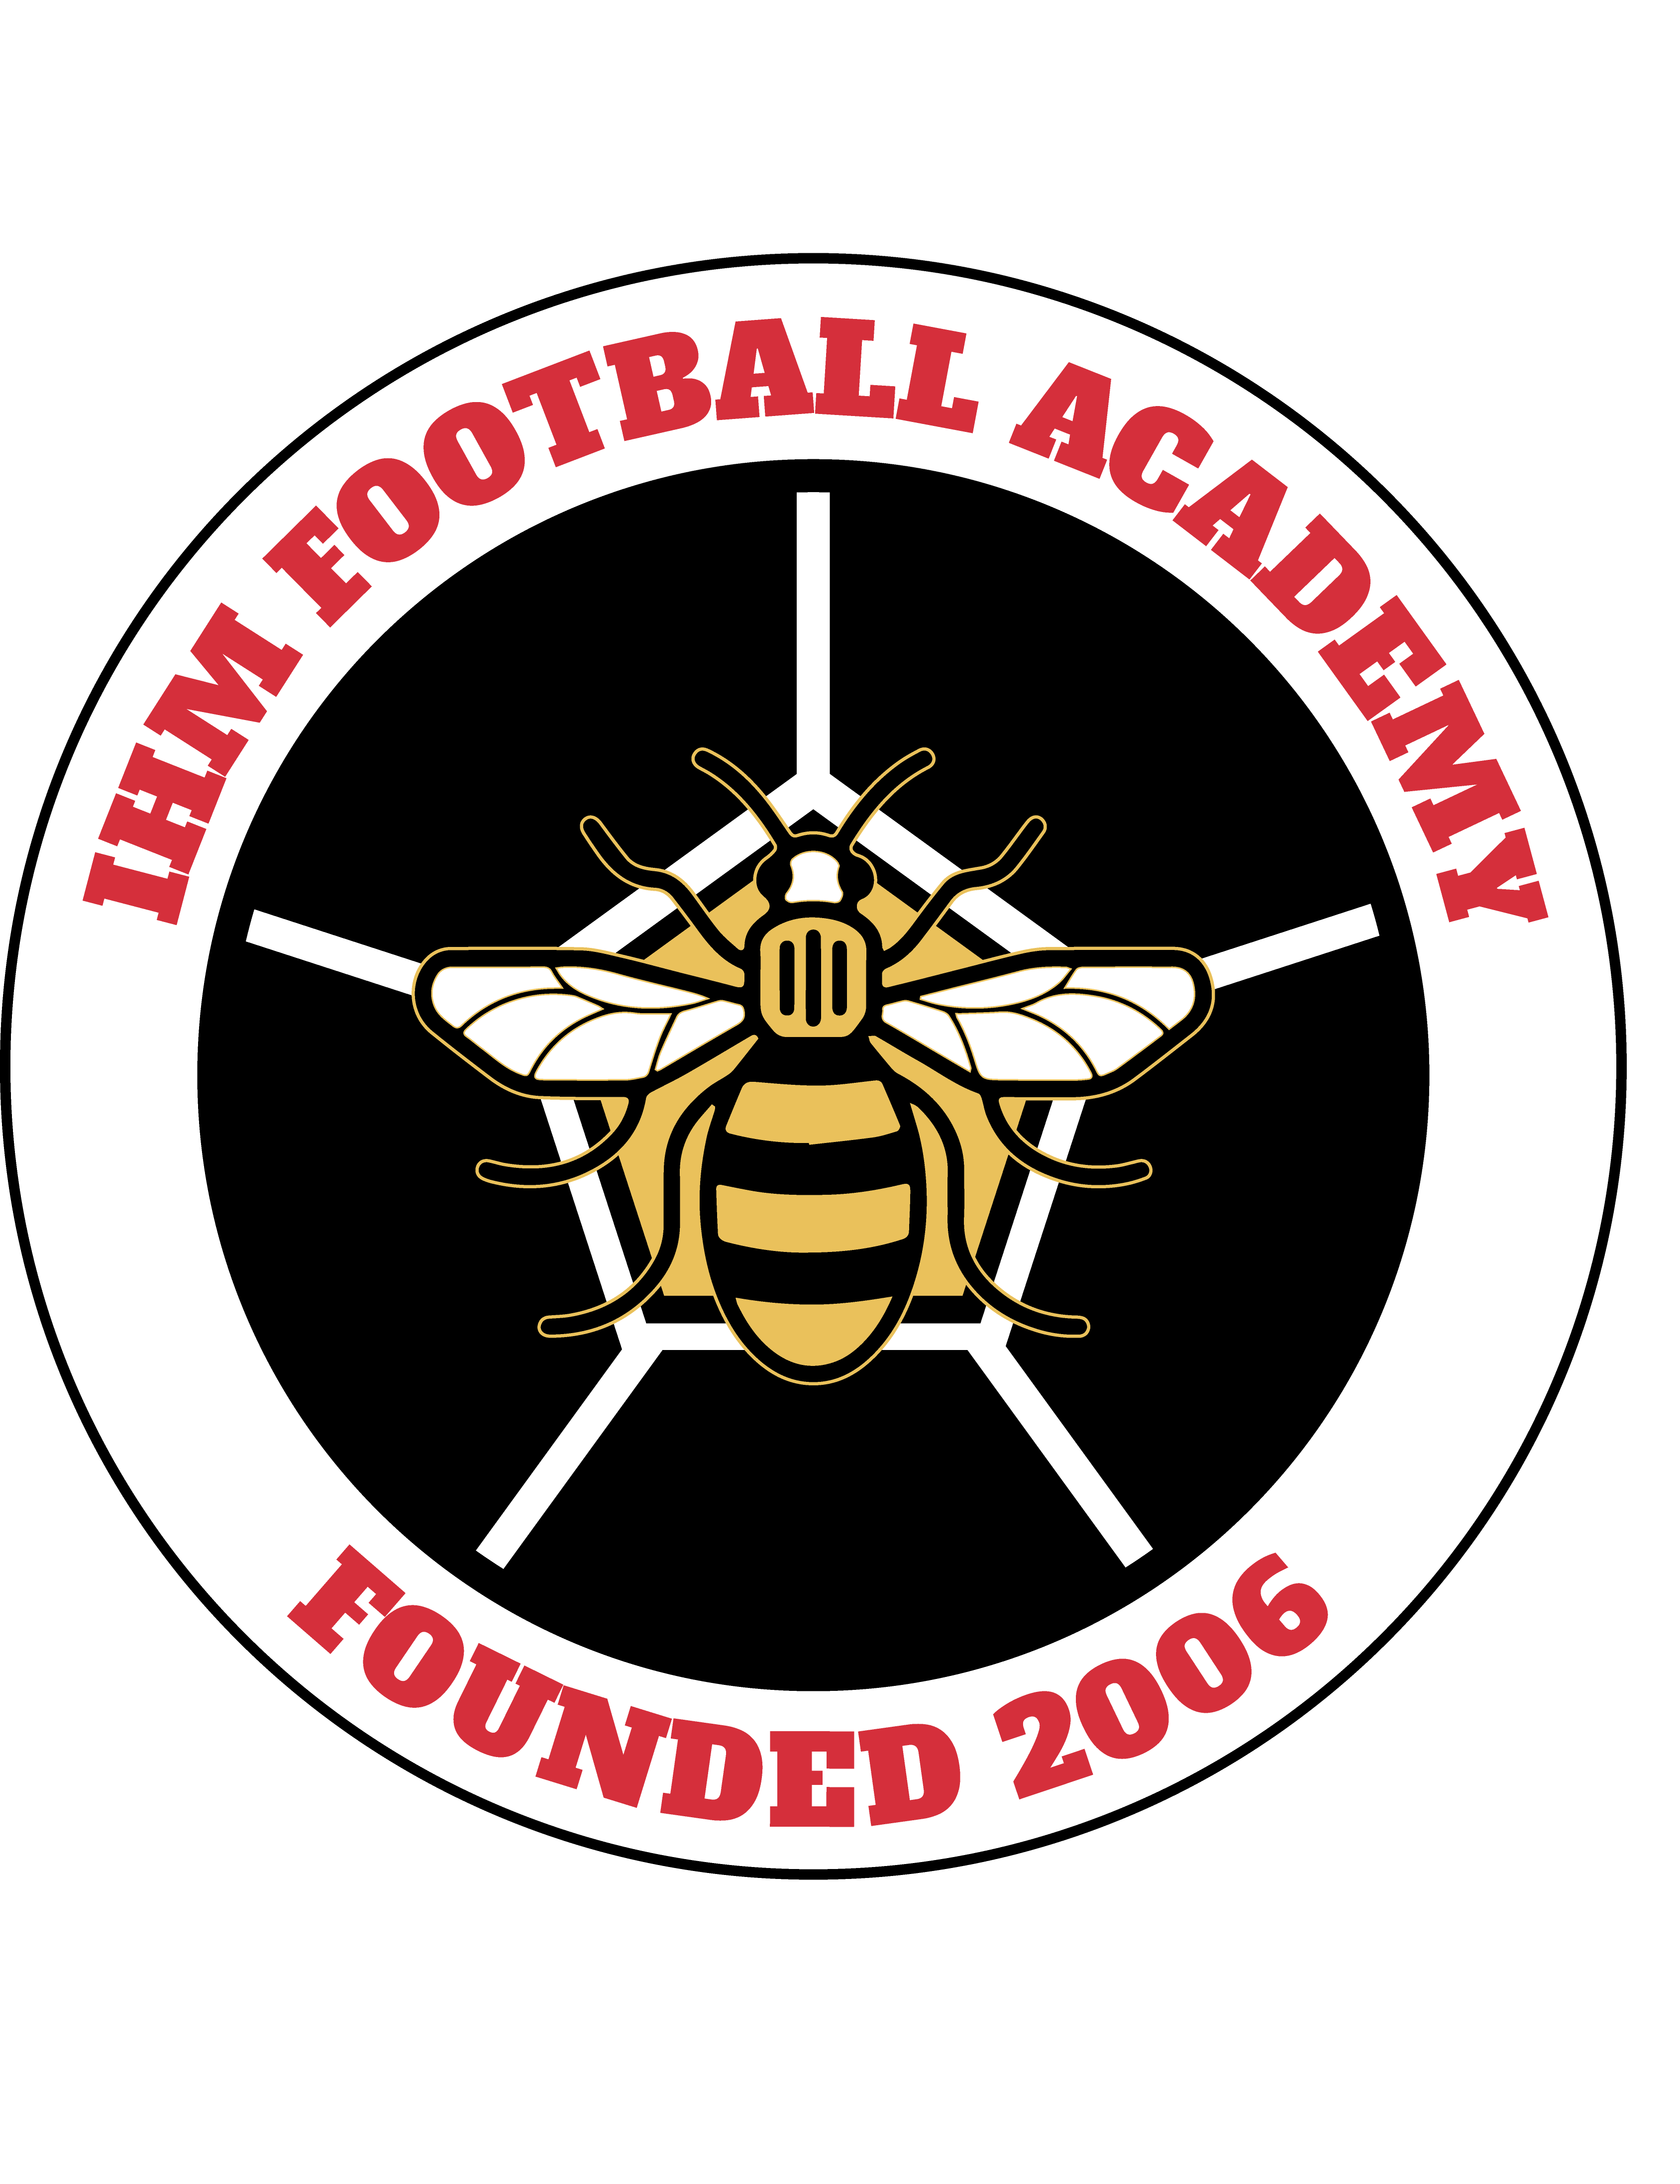 Soccer Assist seals partnership with IHM Football Academy